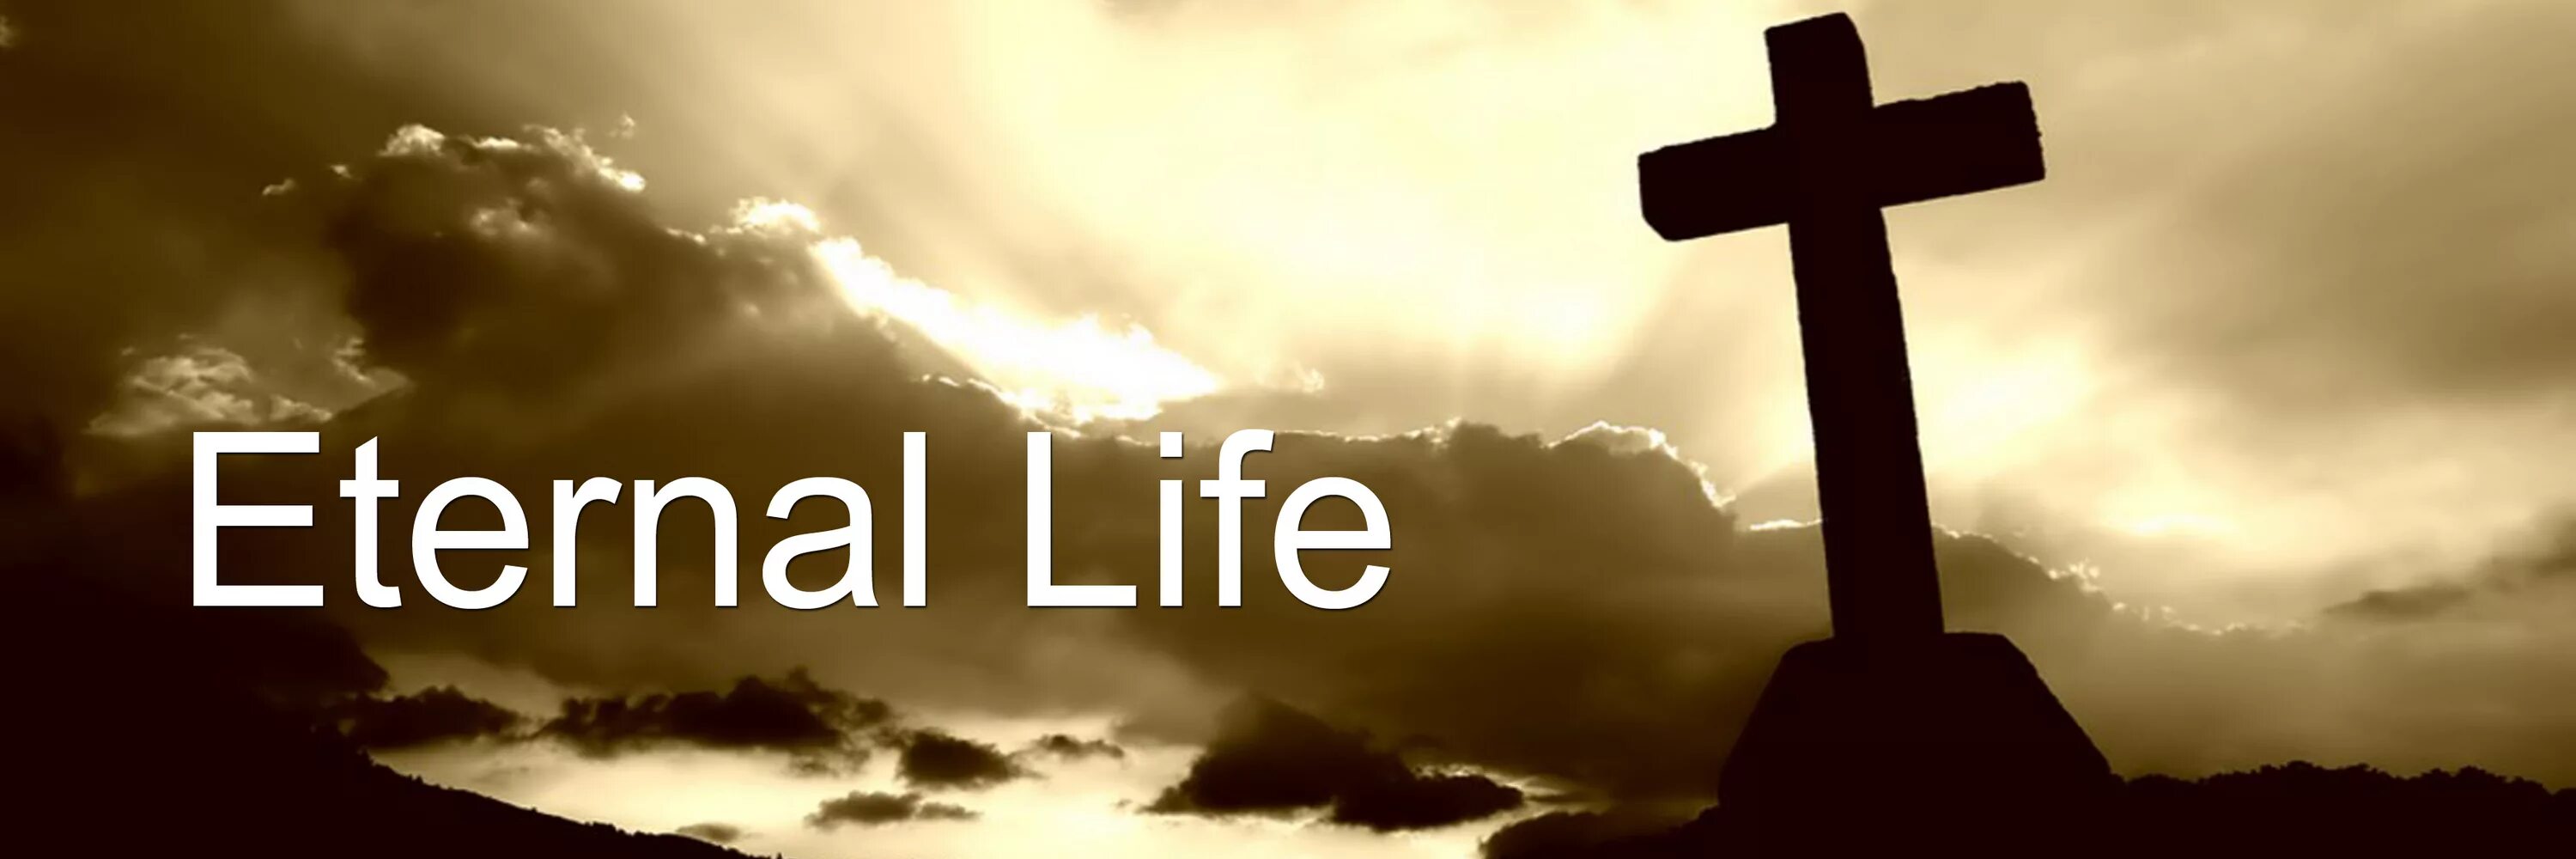 Life is life год. Eternal Life. Life for God. Eternal Life photo. Eternal Life логотип.